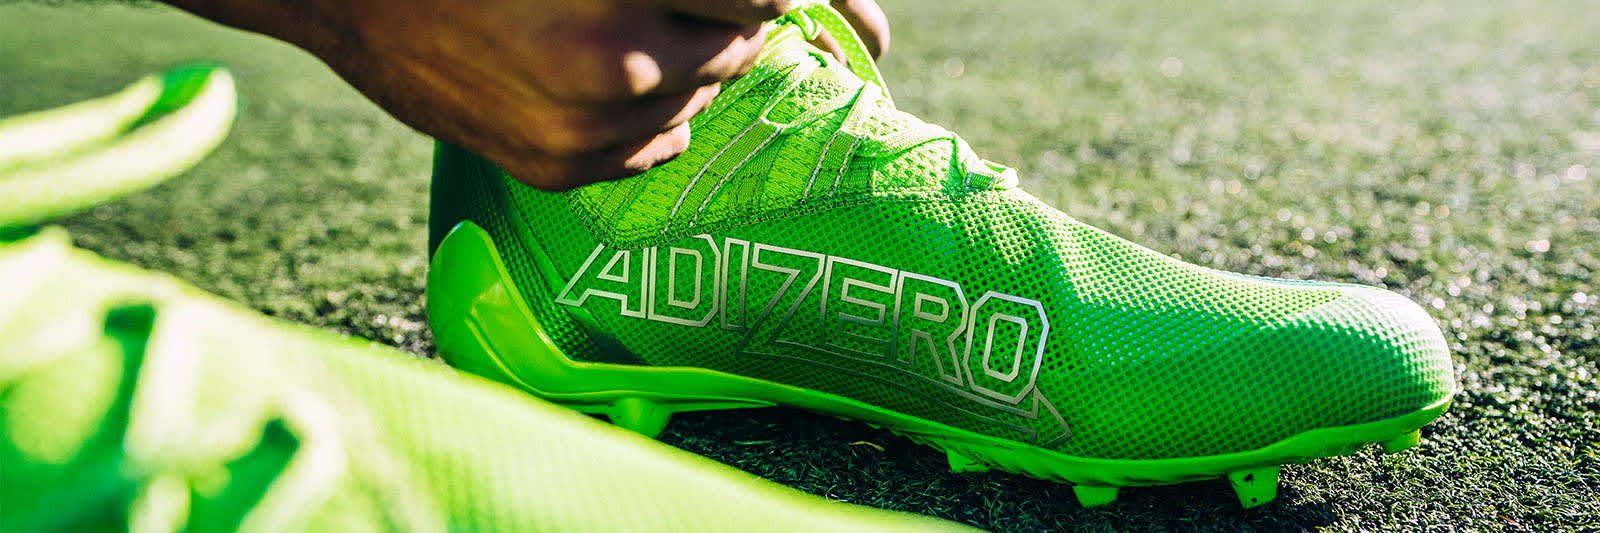 Football Cleats Guide: Choose the Right Cleat for You